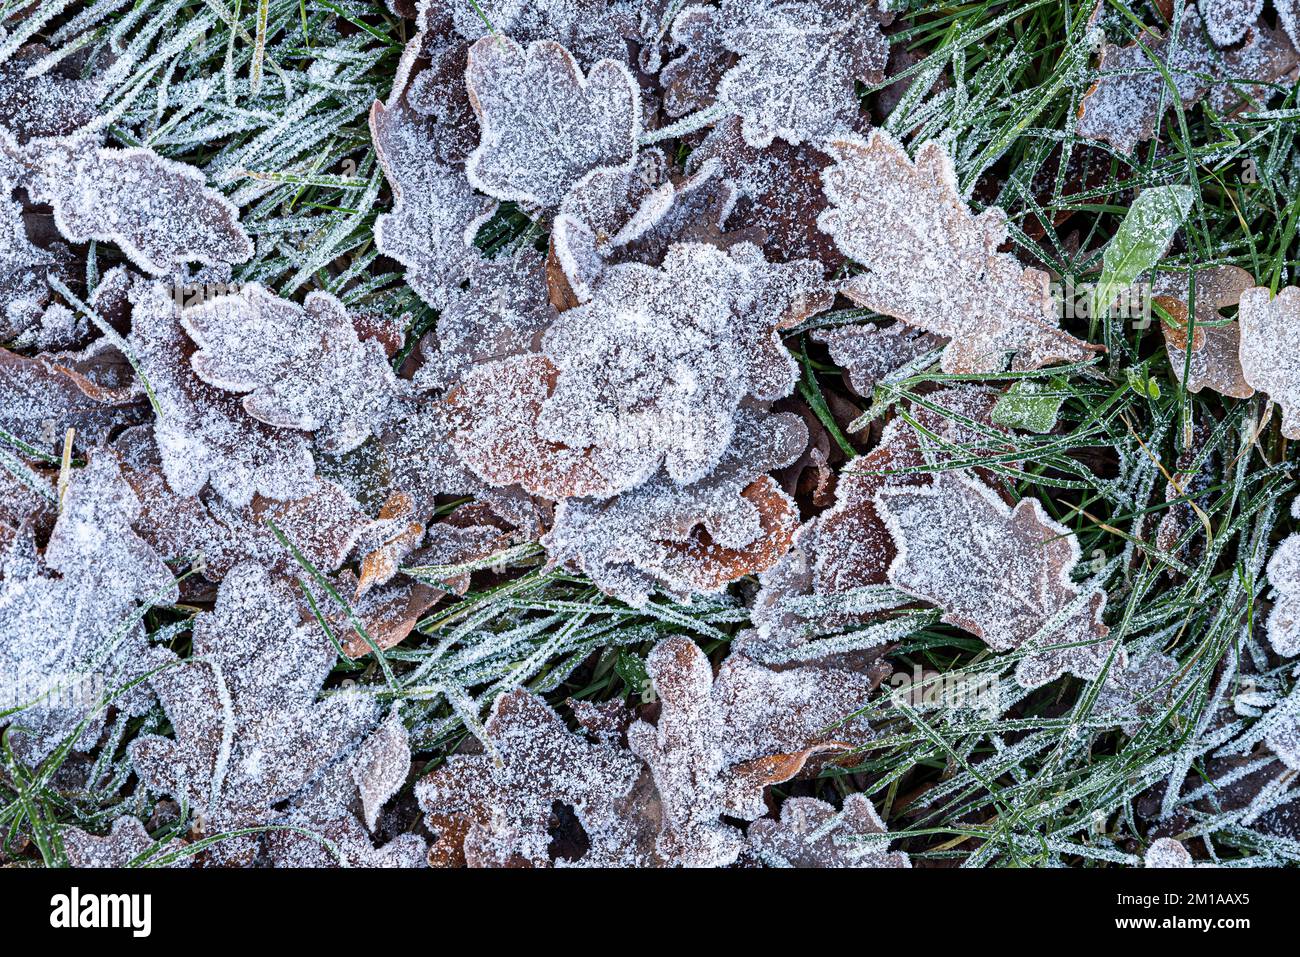 Frost-covered fall leaves on the ground, close-up. Stock Photo